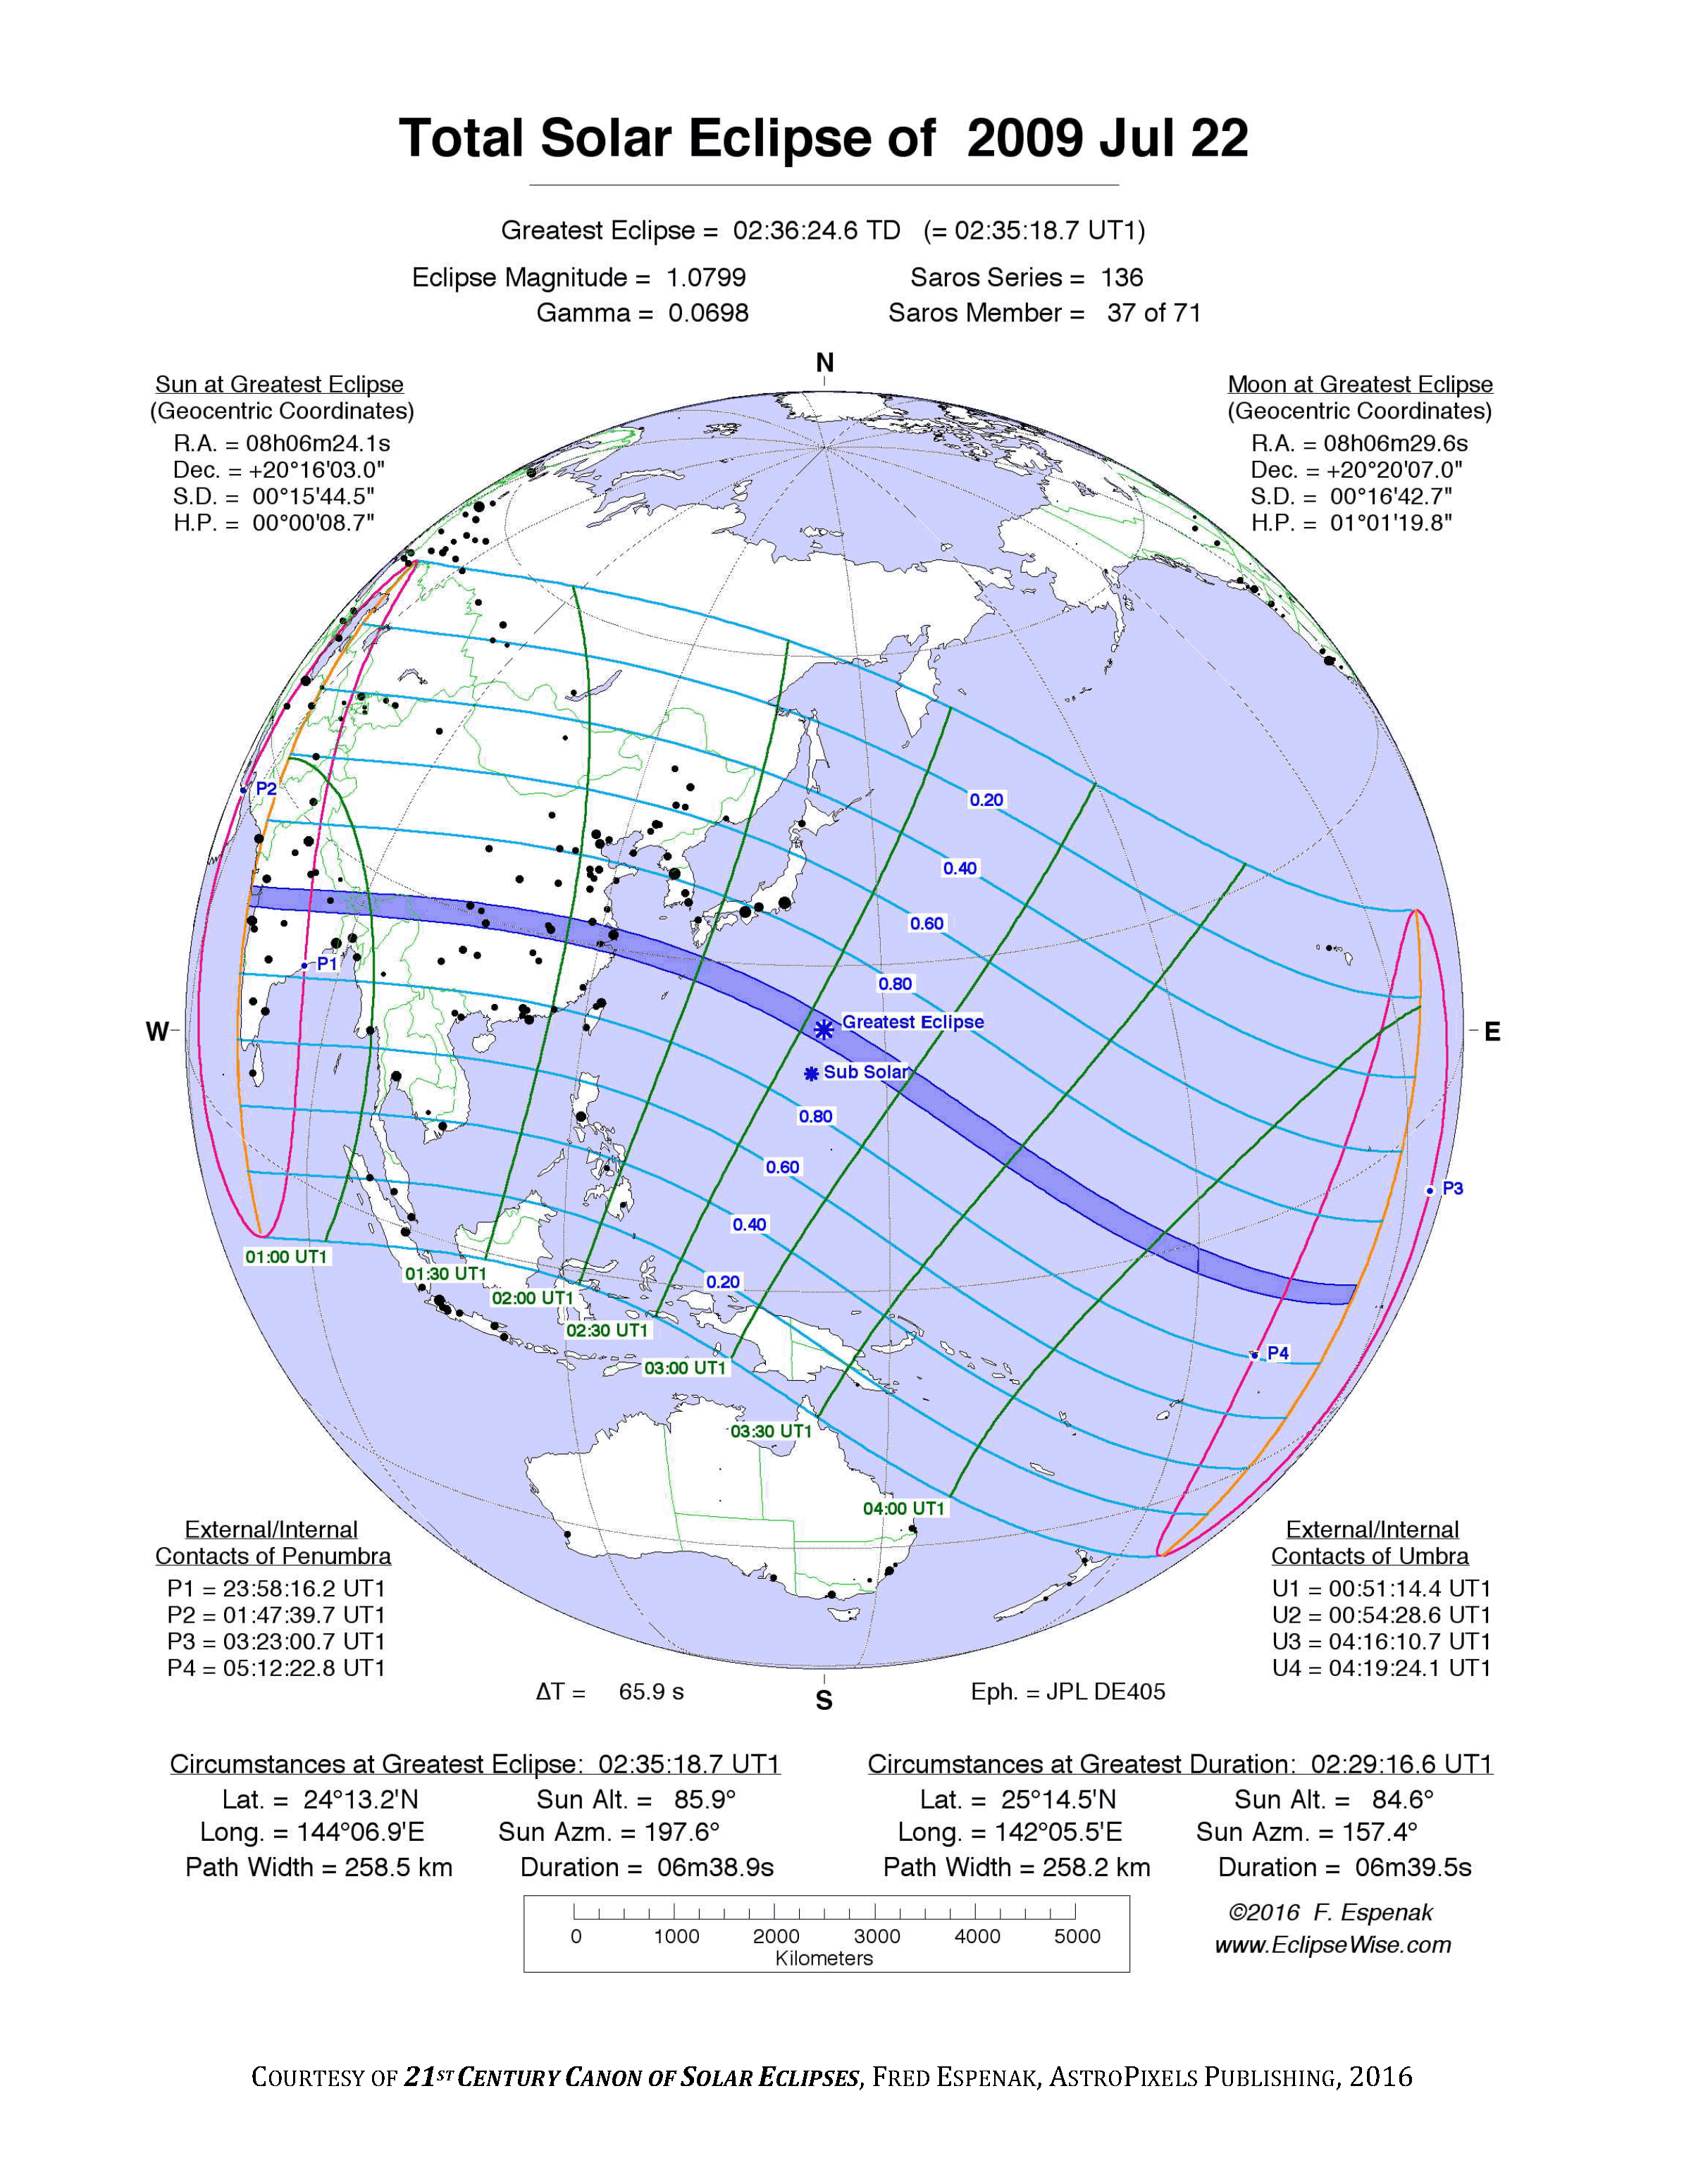 EclipseWise - Total Solar Eclipse of 2010 Jul 11